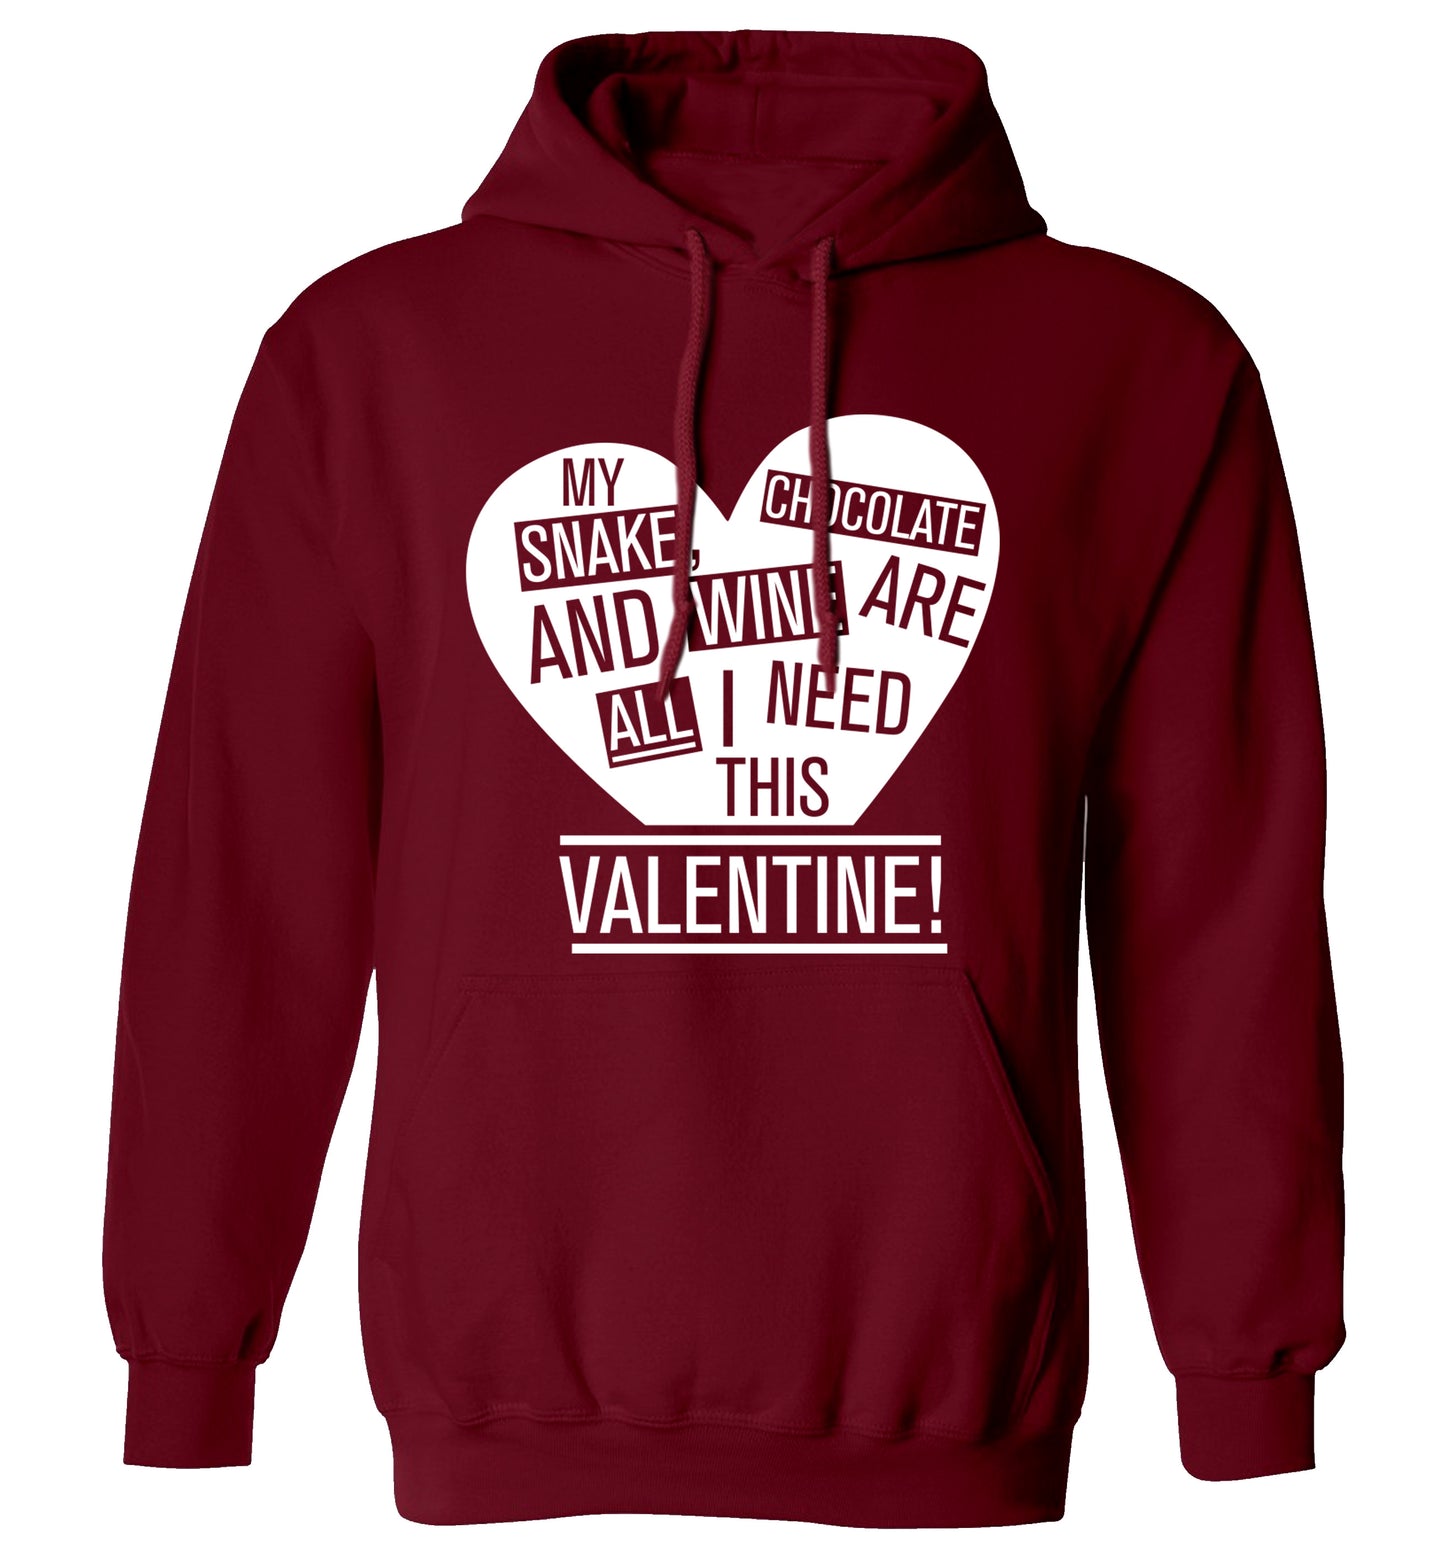 My snake, chocolate and wine are all I need this valentine! adults unisex maroon hoodie 2XL